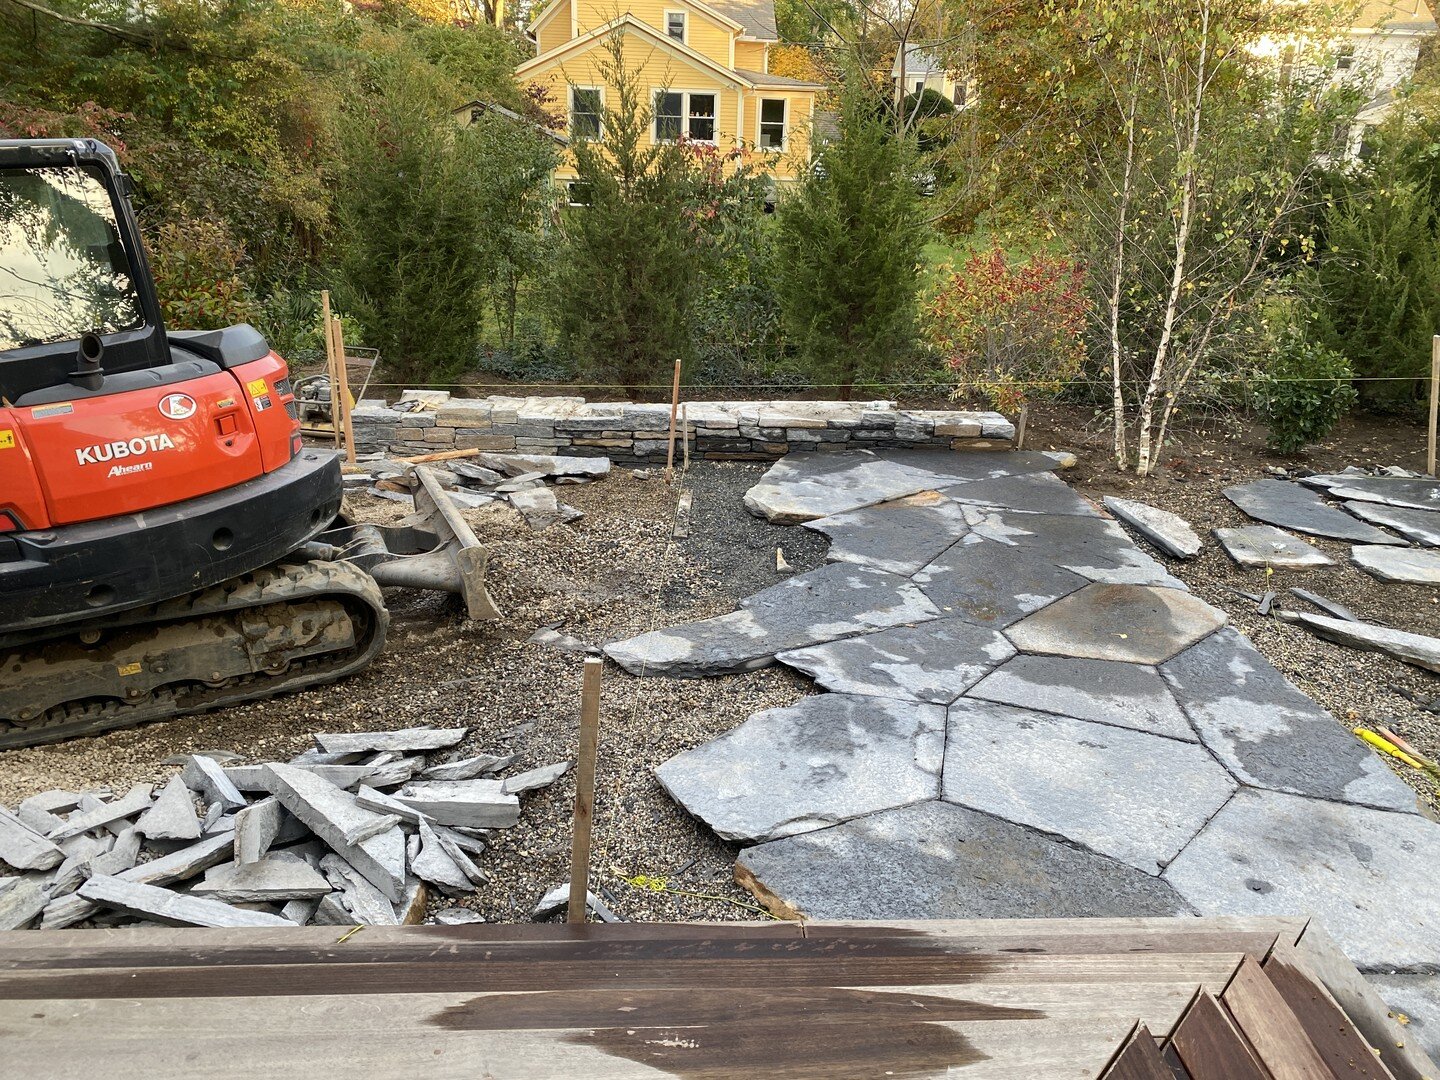 Last fall this #goshenstone patio was underway and now this #countrygarden inspired backyard is nearly complete.

@msc_site.masonry.landscape 

#wolalandarch #landscapedesign #landscapearchitecture #landscape #thisislandscapearchitecture #westernma #